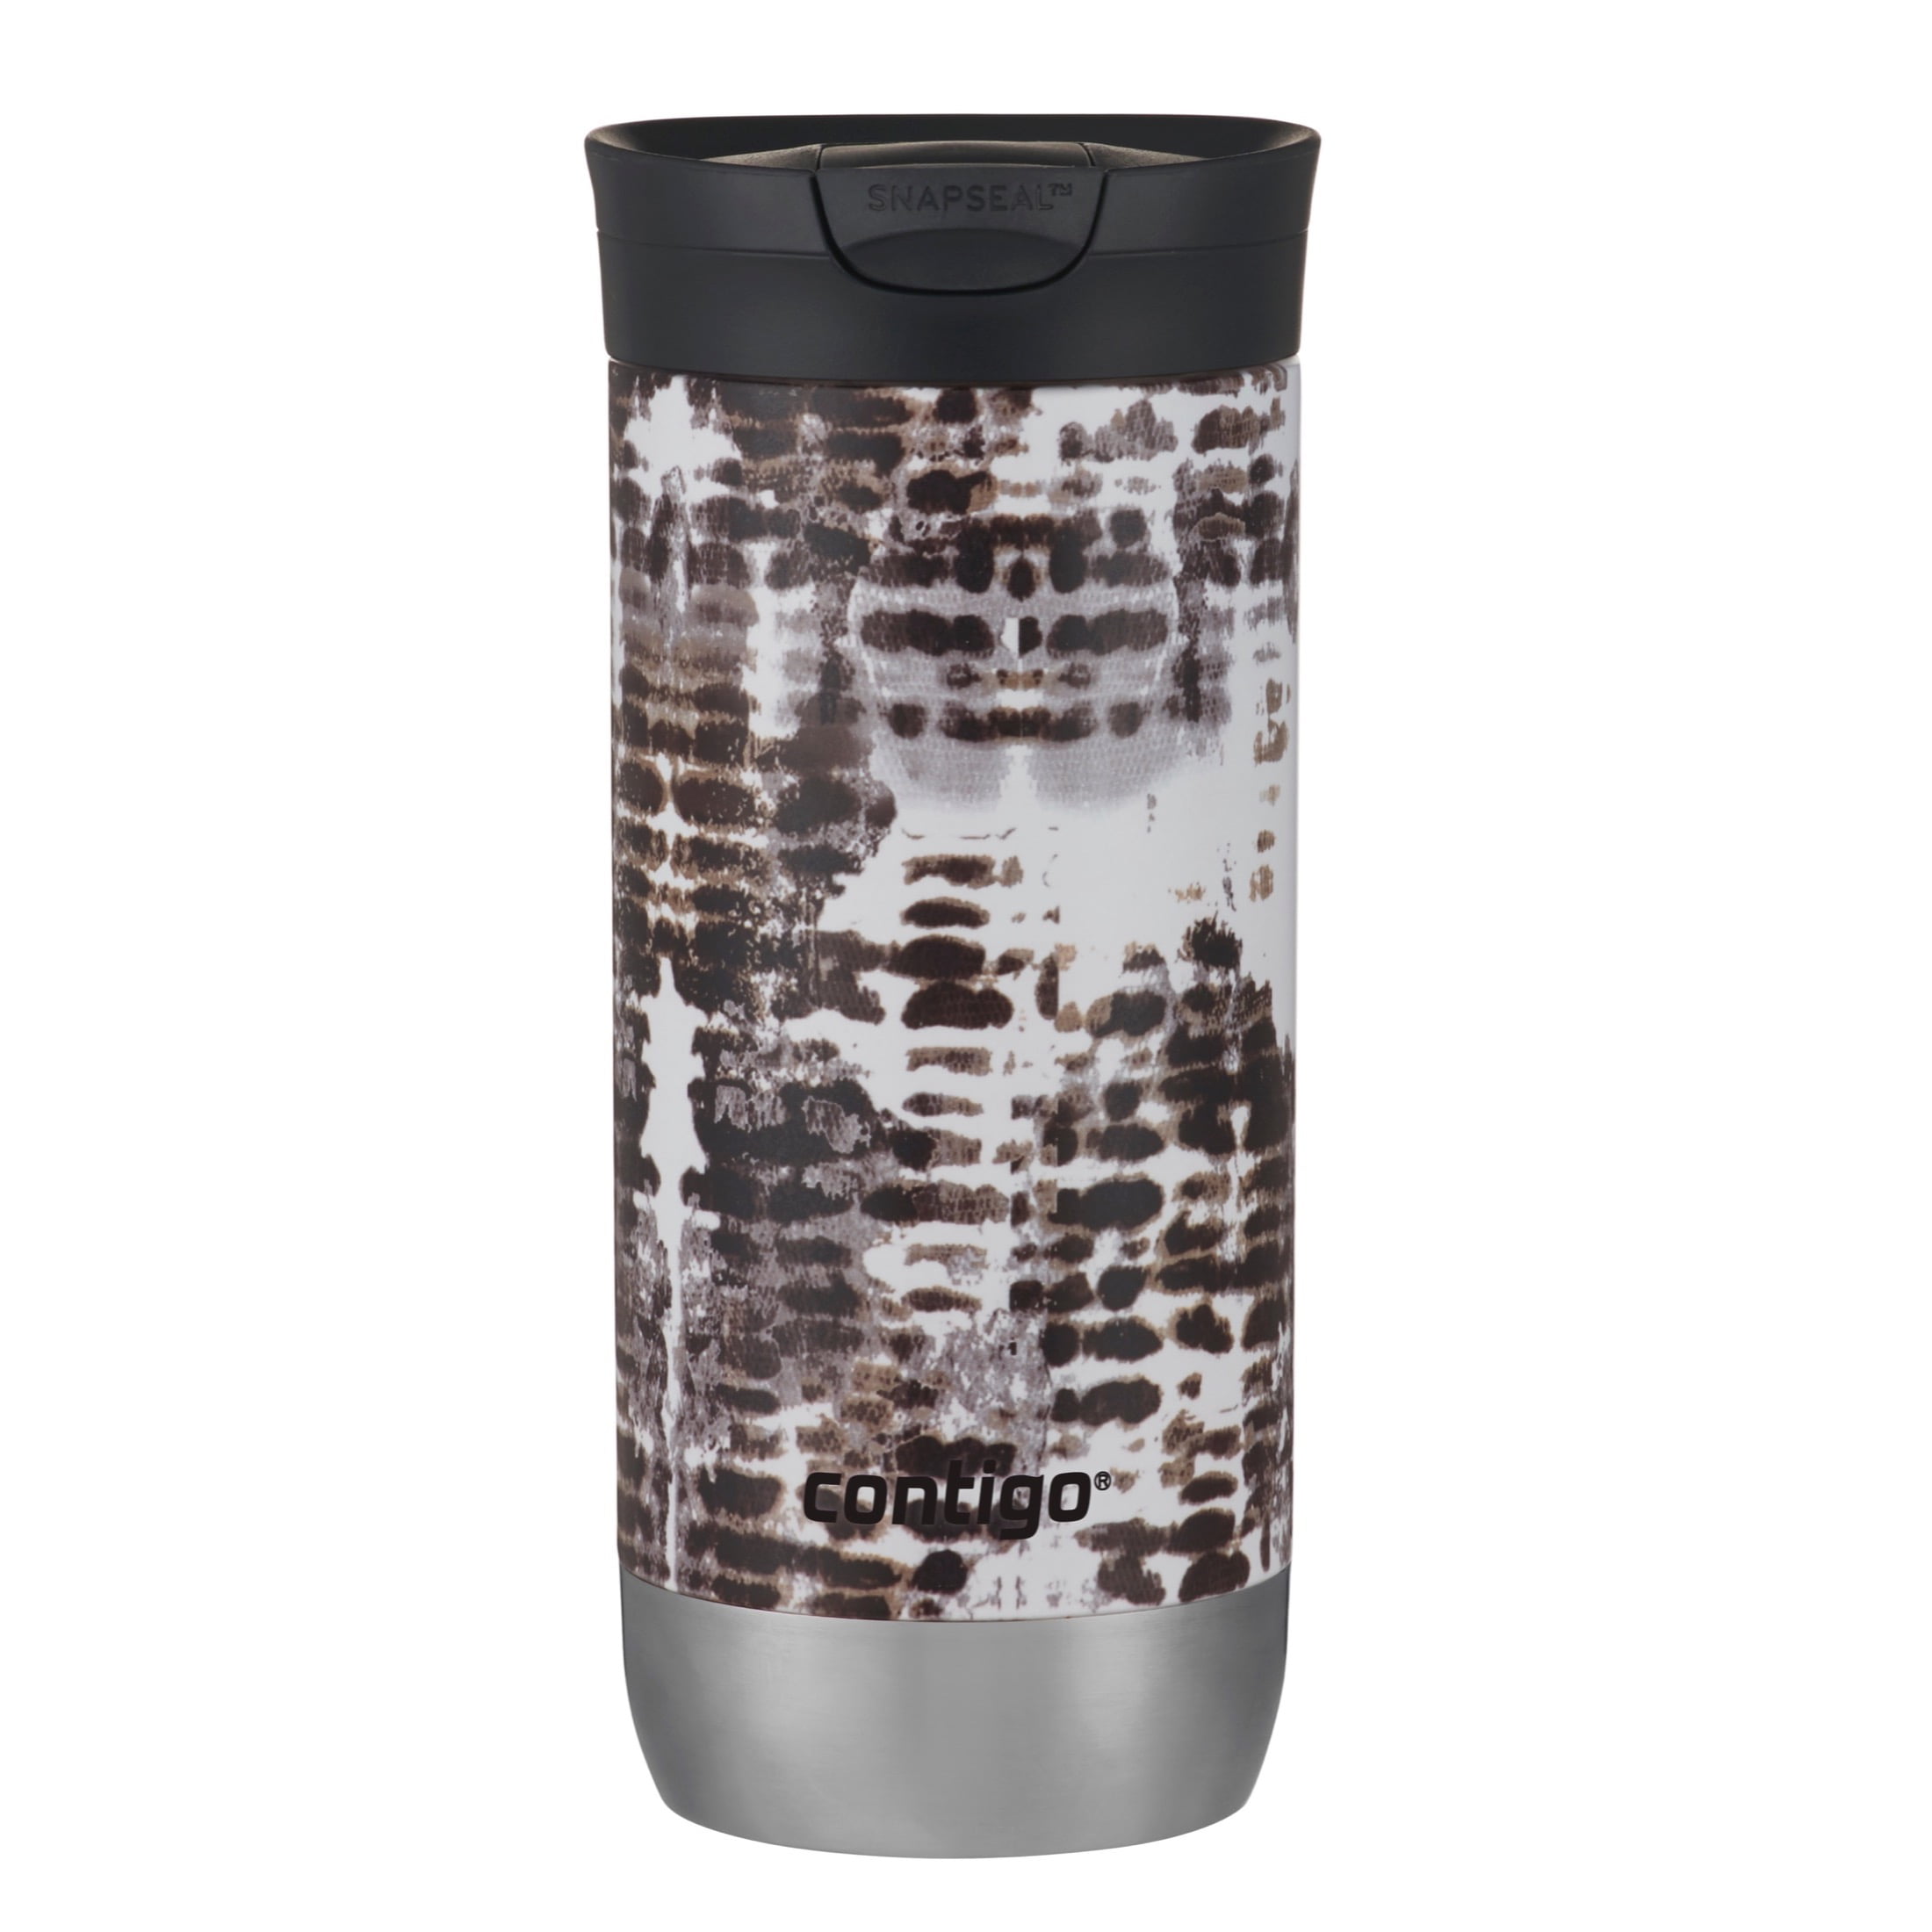 Contigo Couture SNAPSEAL Stainless Steel Vacuum-insulated Coffee Travel Mug,  16 Oz, Blonde Wood 